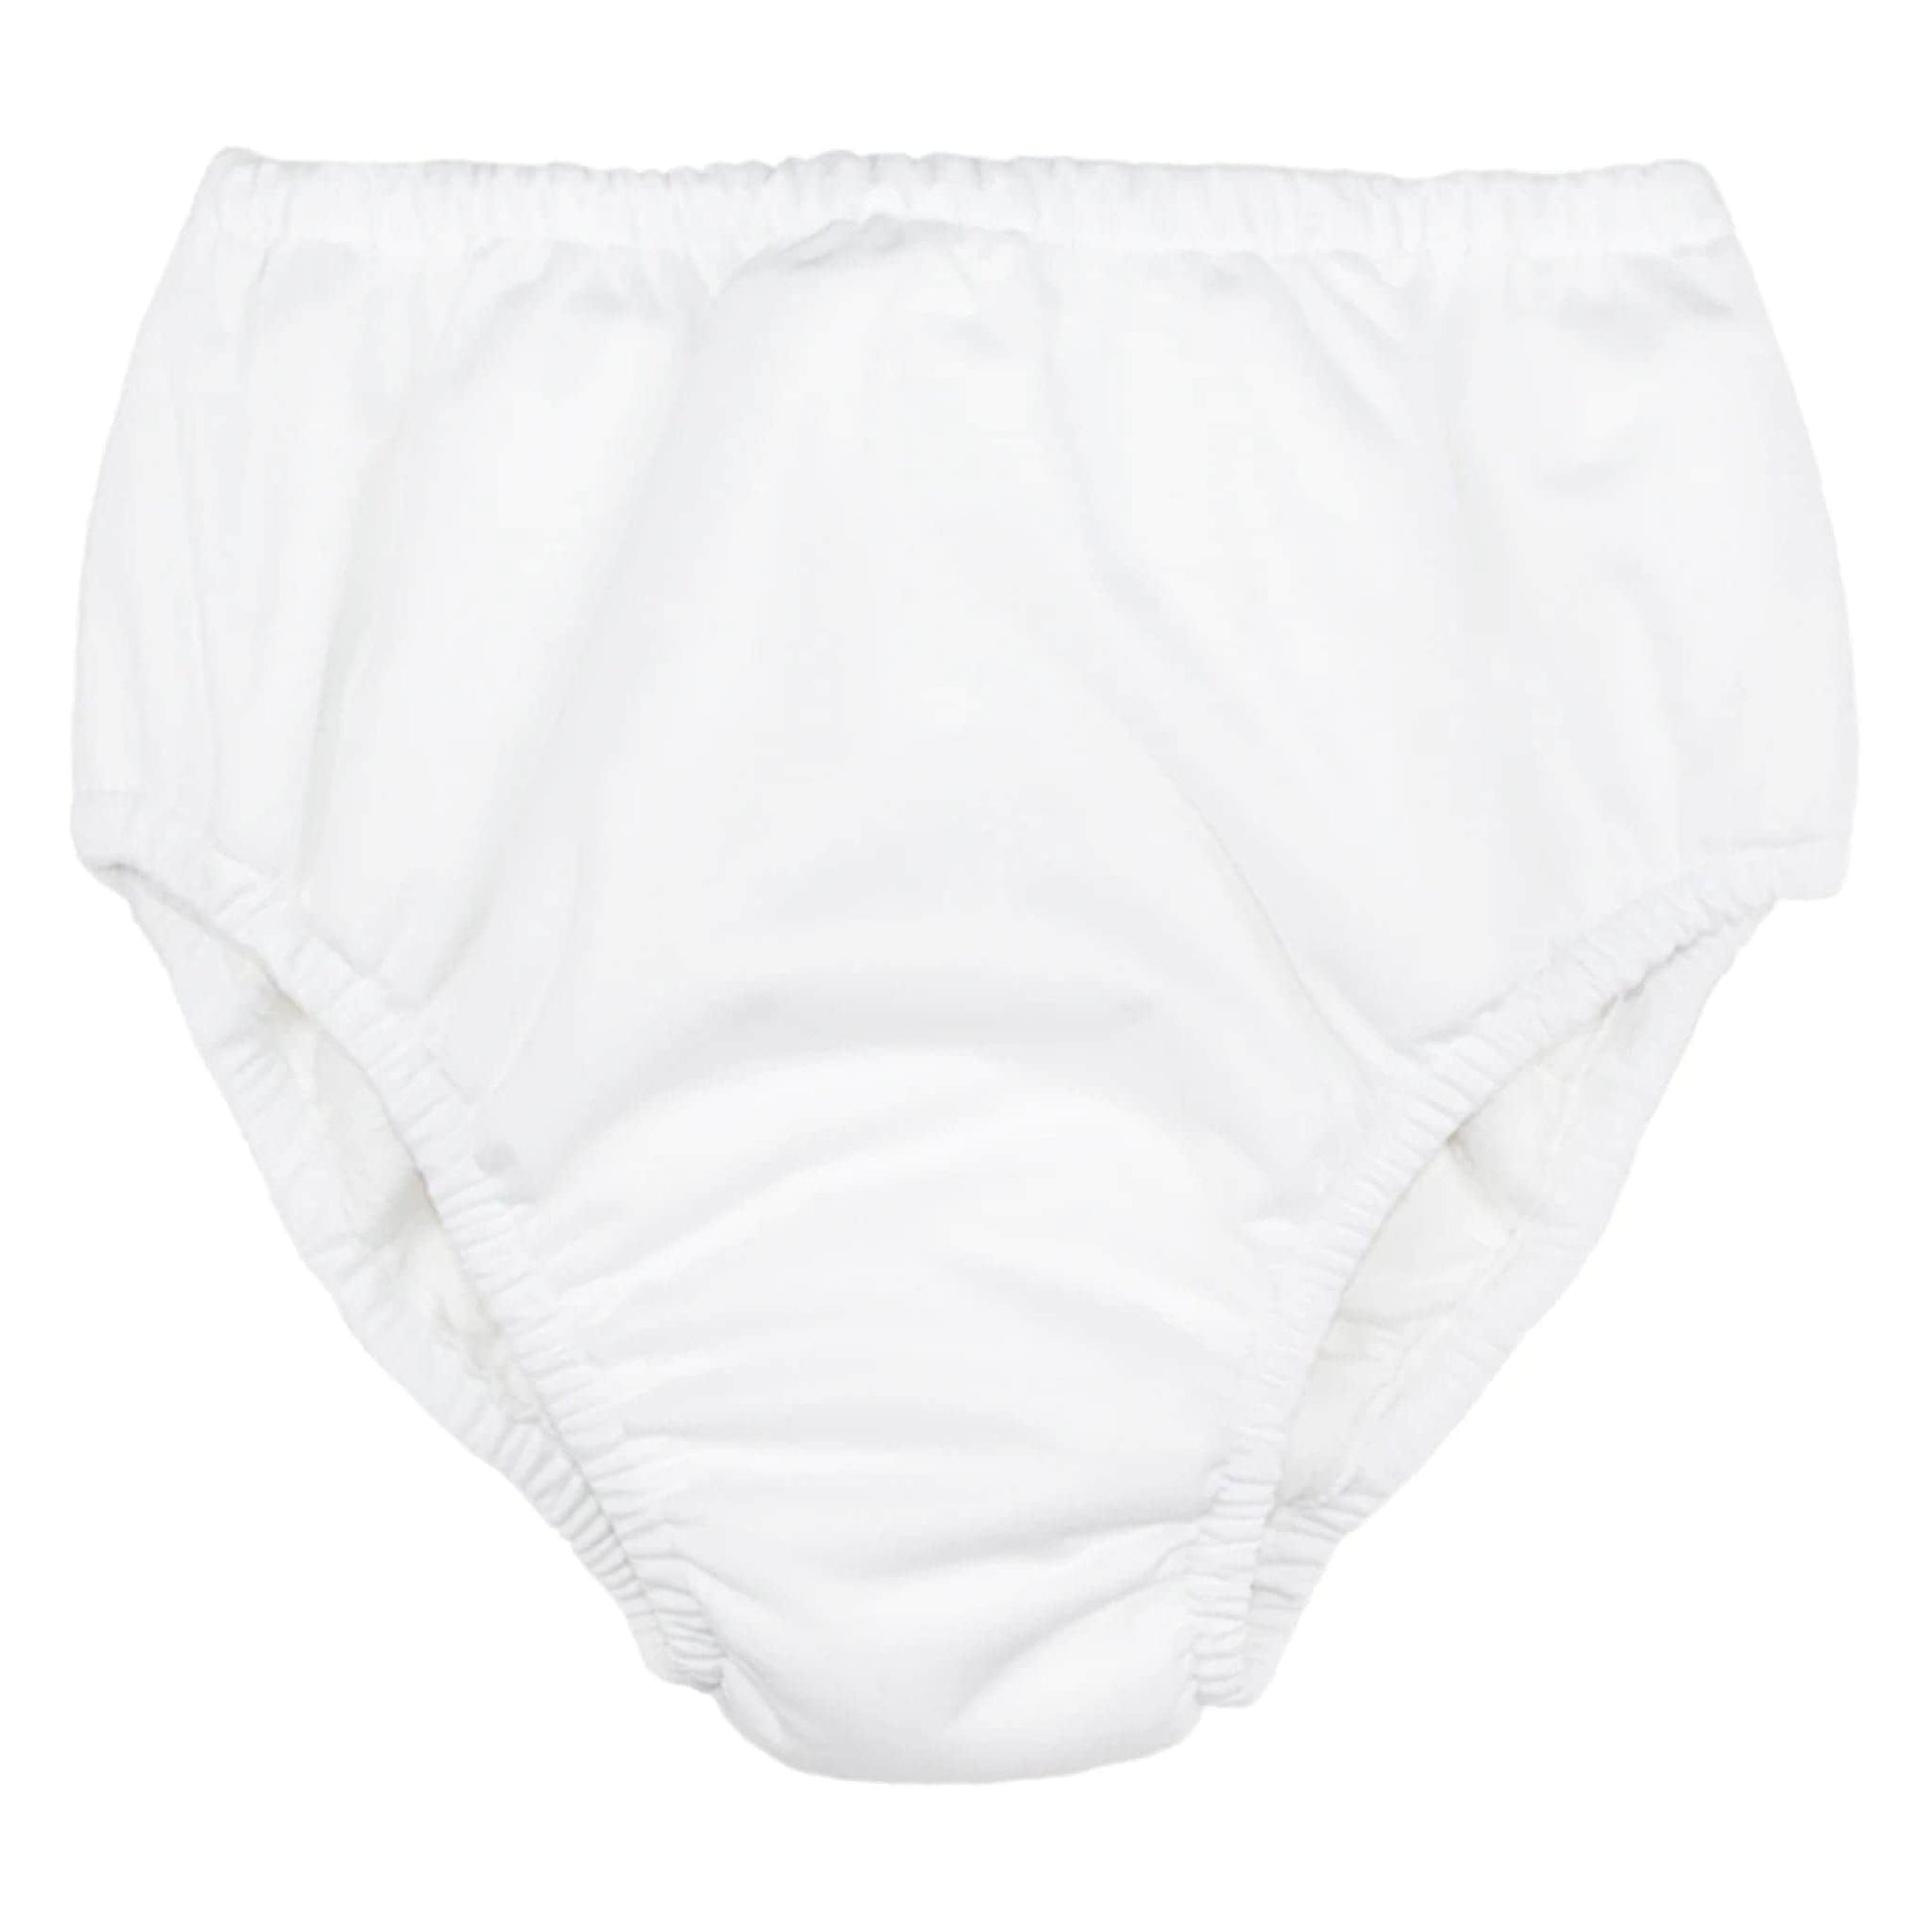 Kids Pullup Reusable Night Incontinence Underwear (600ml) - White - Sale - Caring Clothing